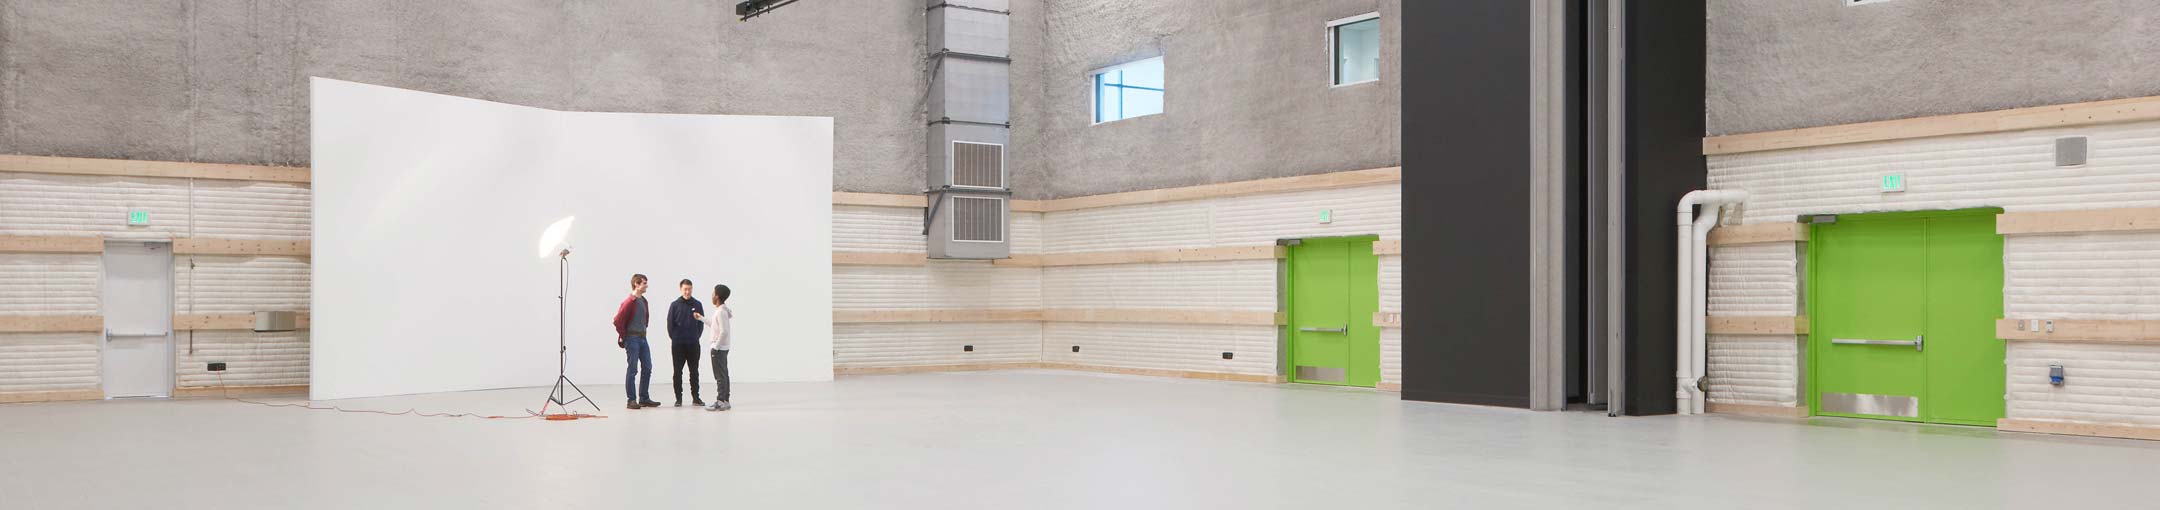 A large, open room with a white backdrop for photography with bright green doors